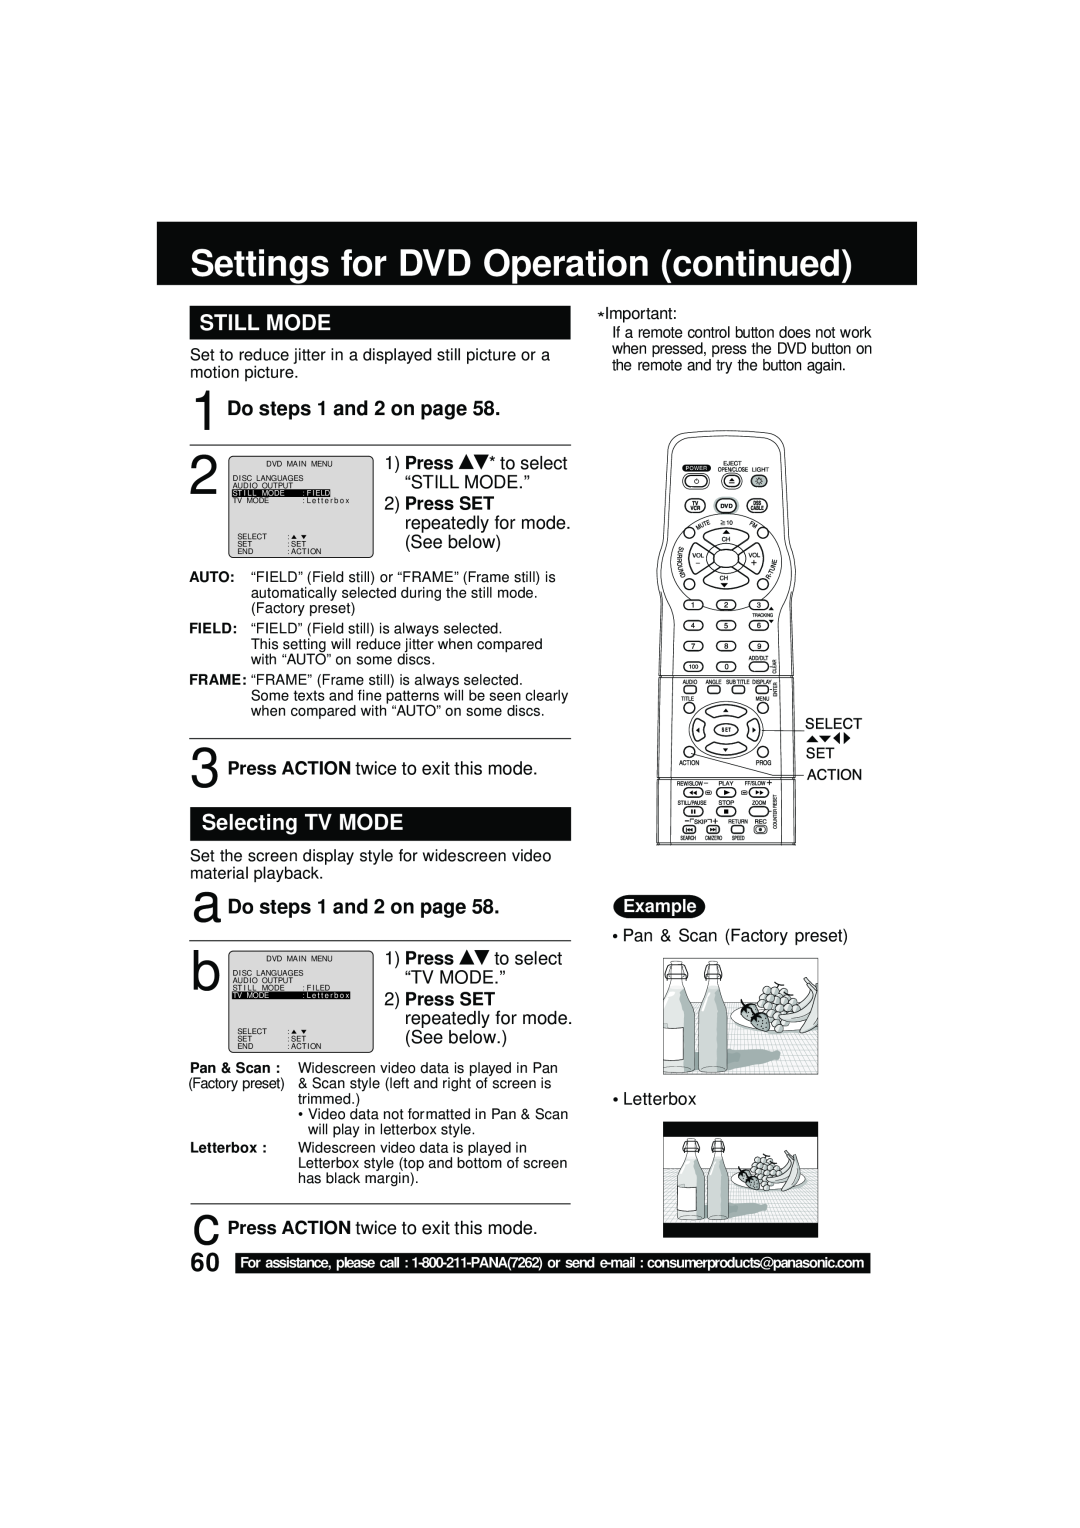 Panasonic PV DM2092 Settings for DVD Operation continued, Still Mode, Selecting TV MODE, a Do steps 1 and 2 on page, Press 